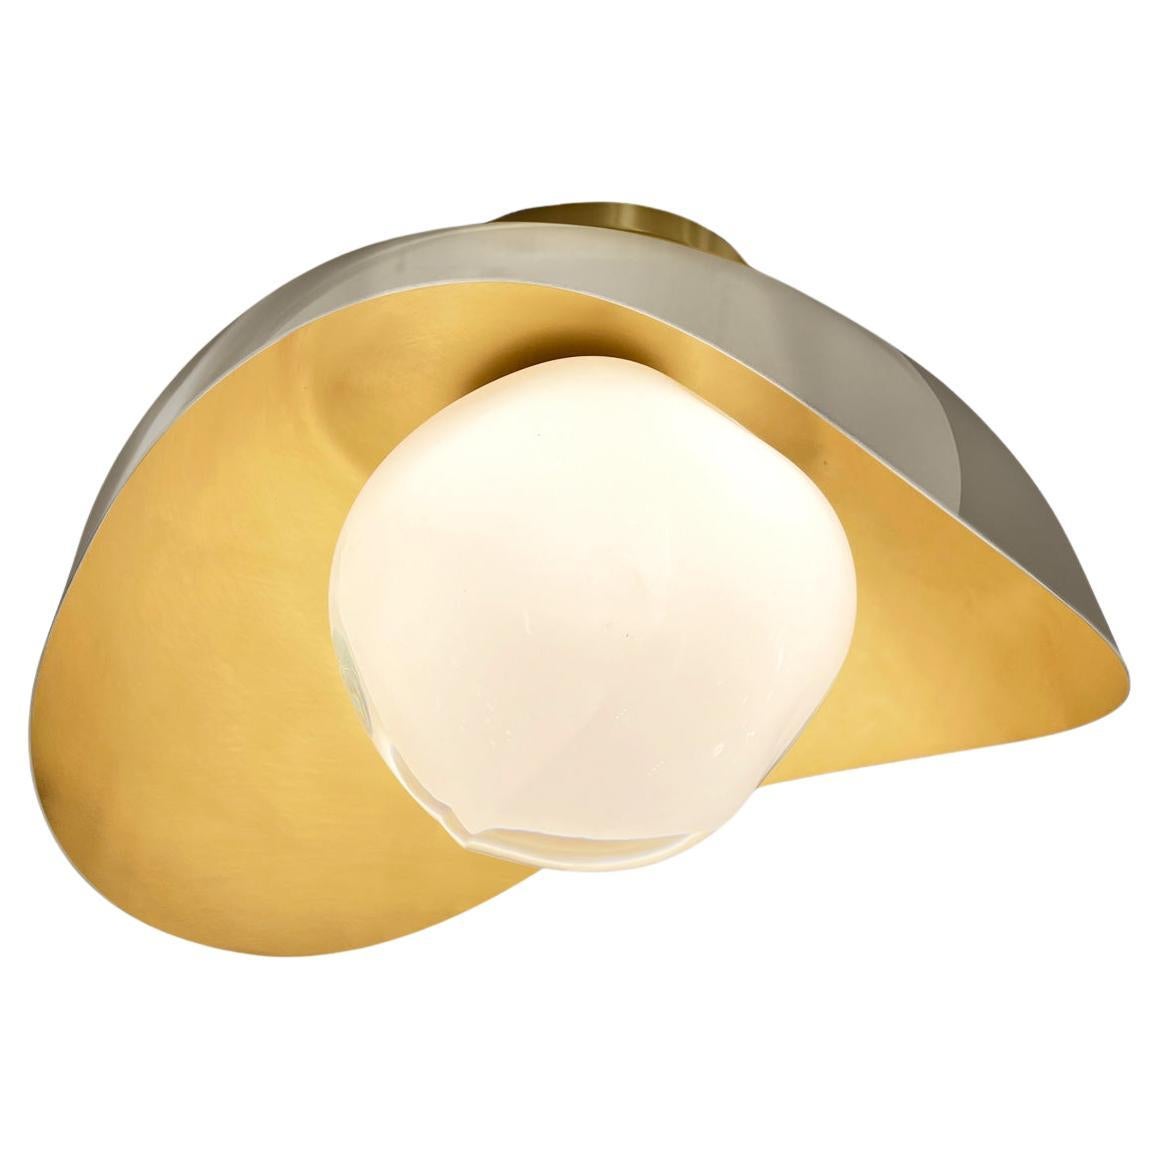 Perla Flushmount Ceiling Light by Gaspare Asaro-Satin Brass/Polished Nickel For Sale